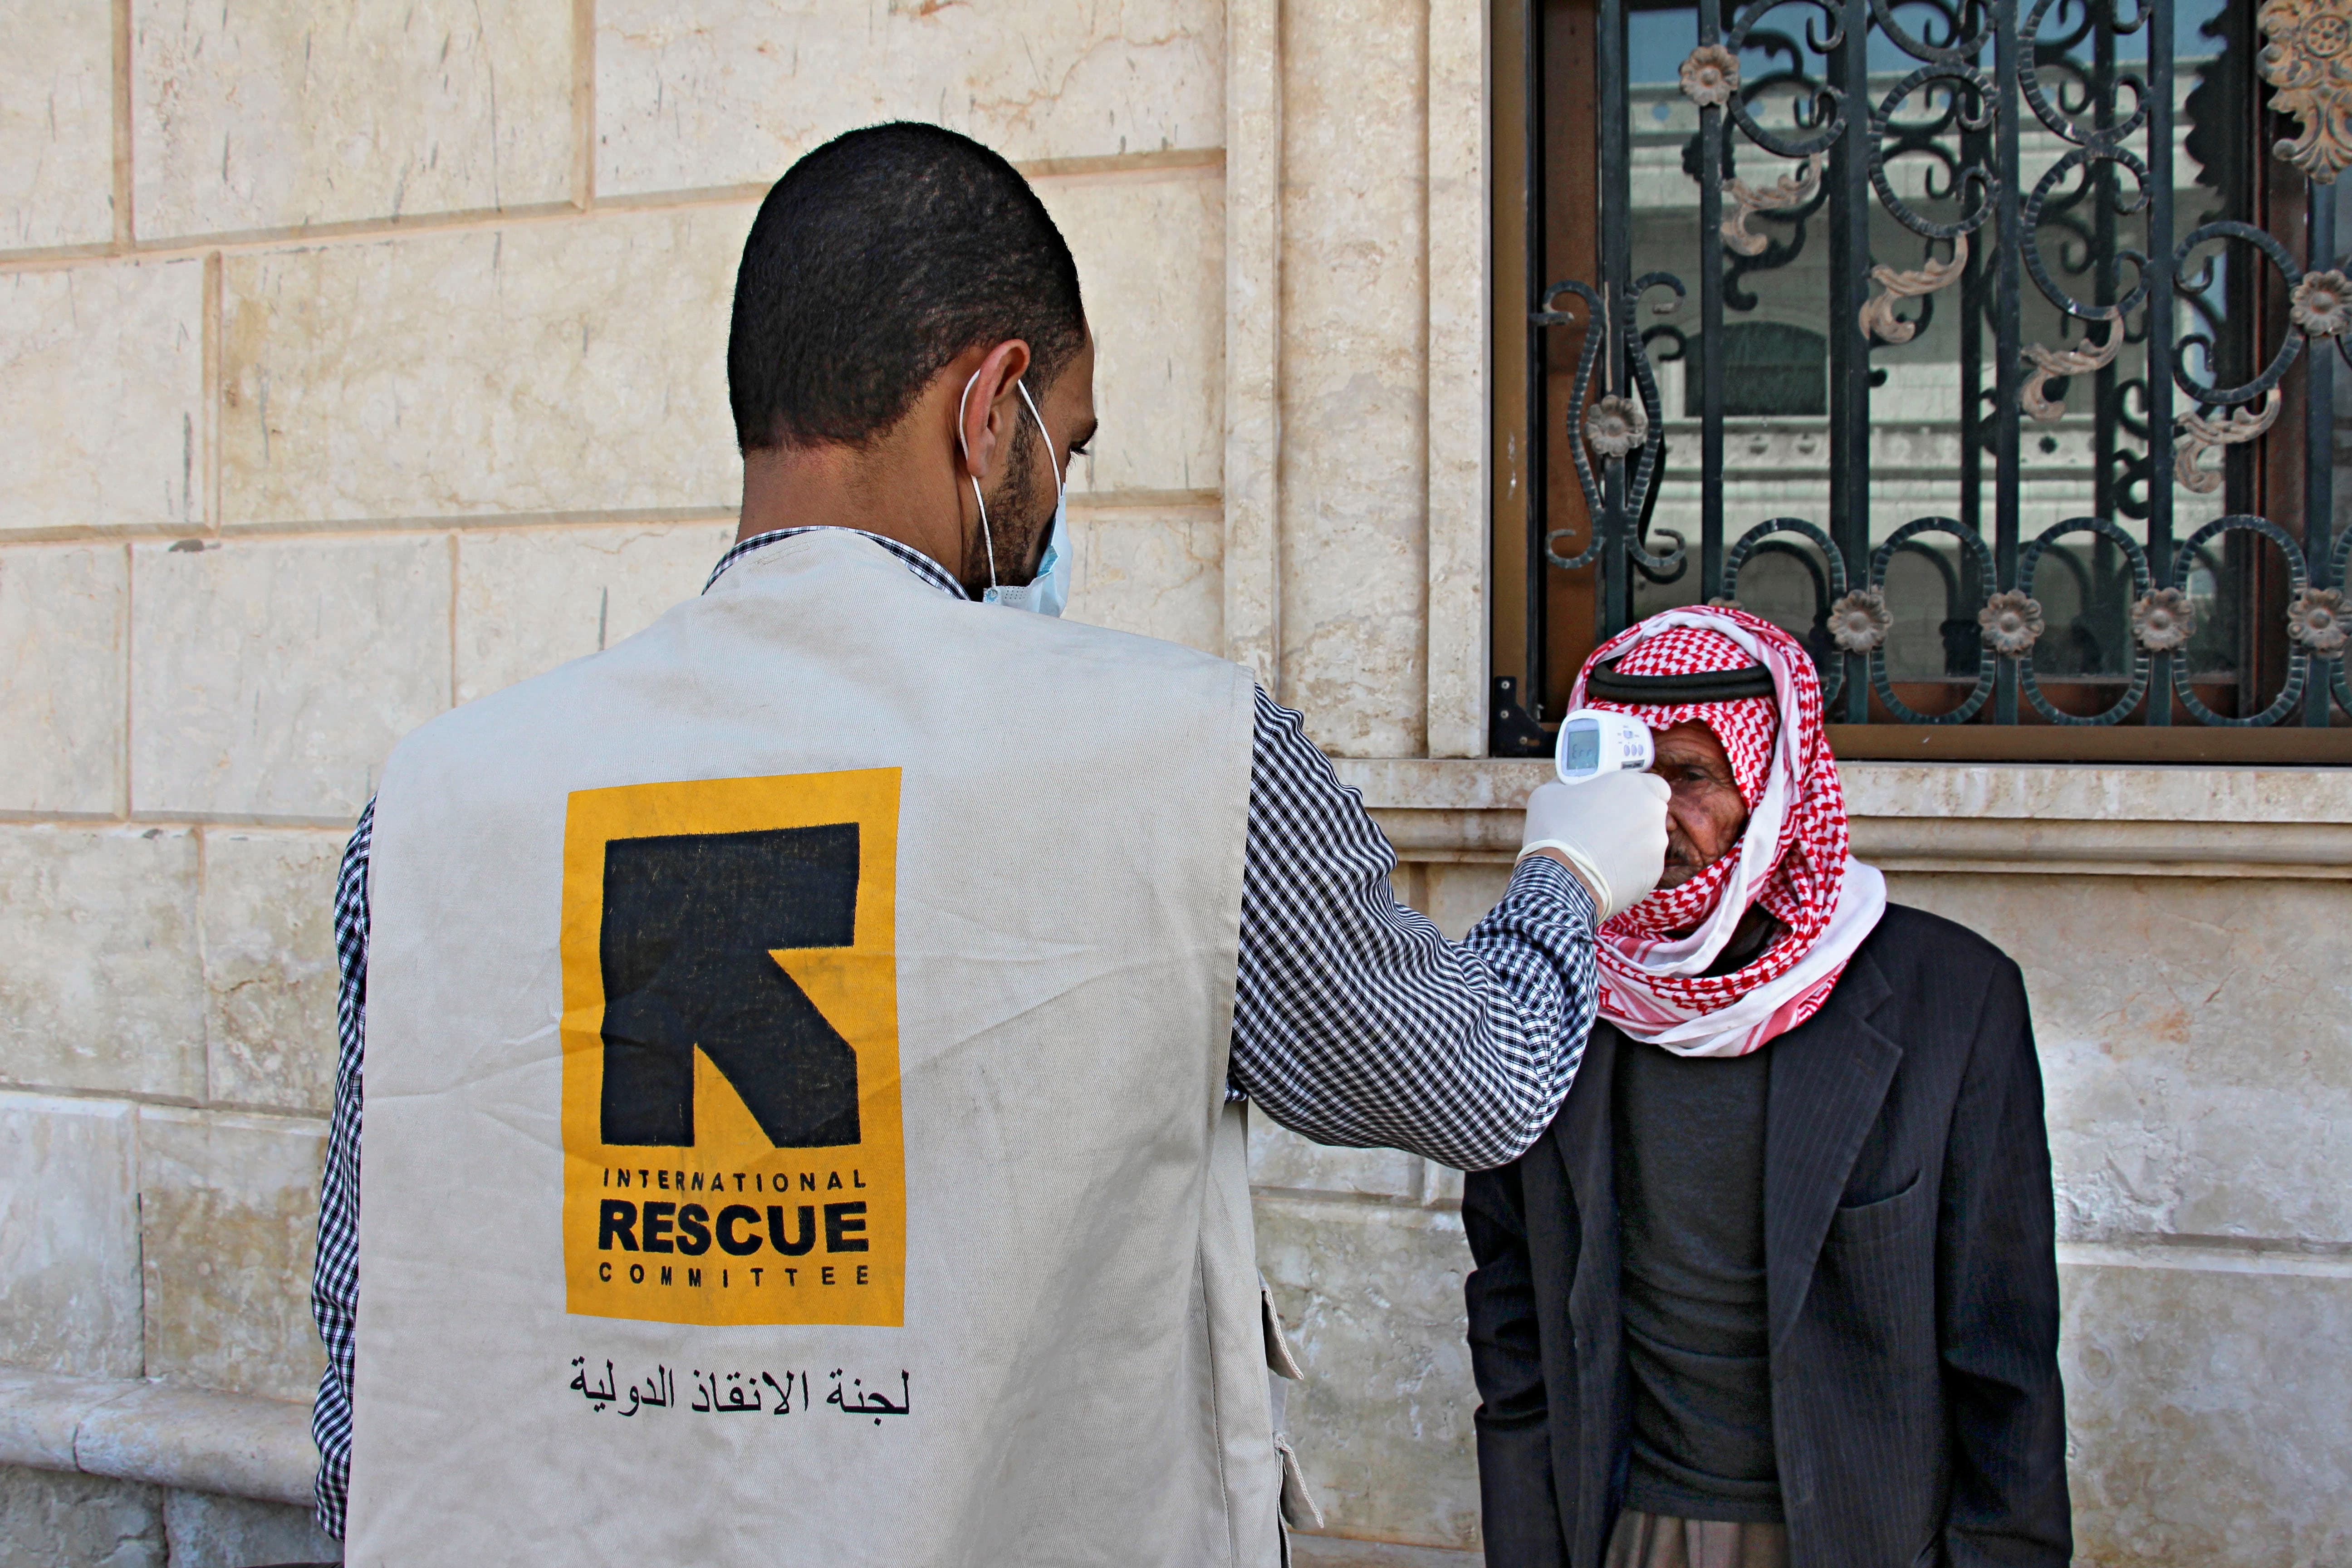 The International Rescue Committee has taken precautions to ensure the safety of its activities in northwest Syria and to prevent the spread of COVID-19 while continuing to assist the most vulnerable families in rebuilding their lives.